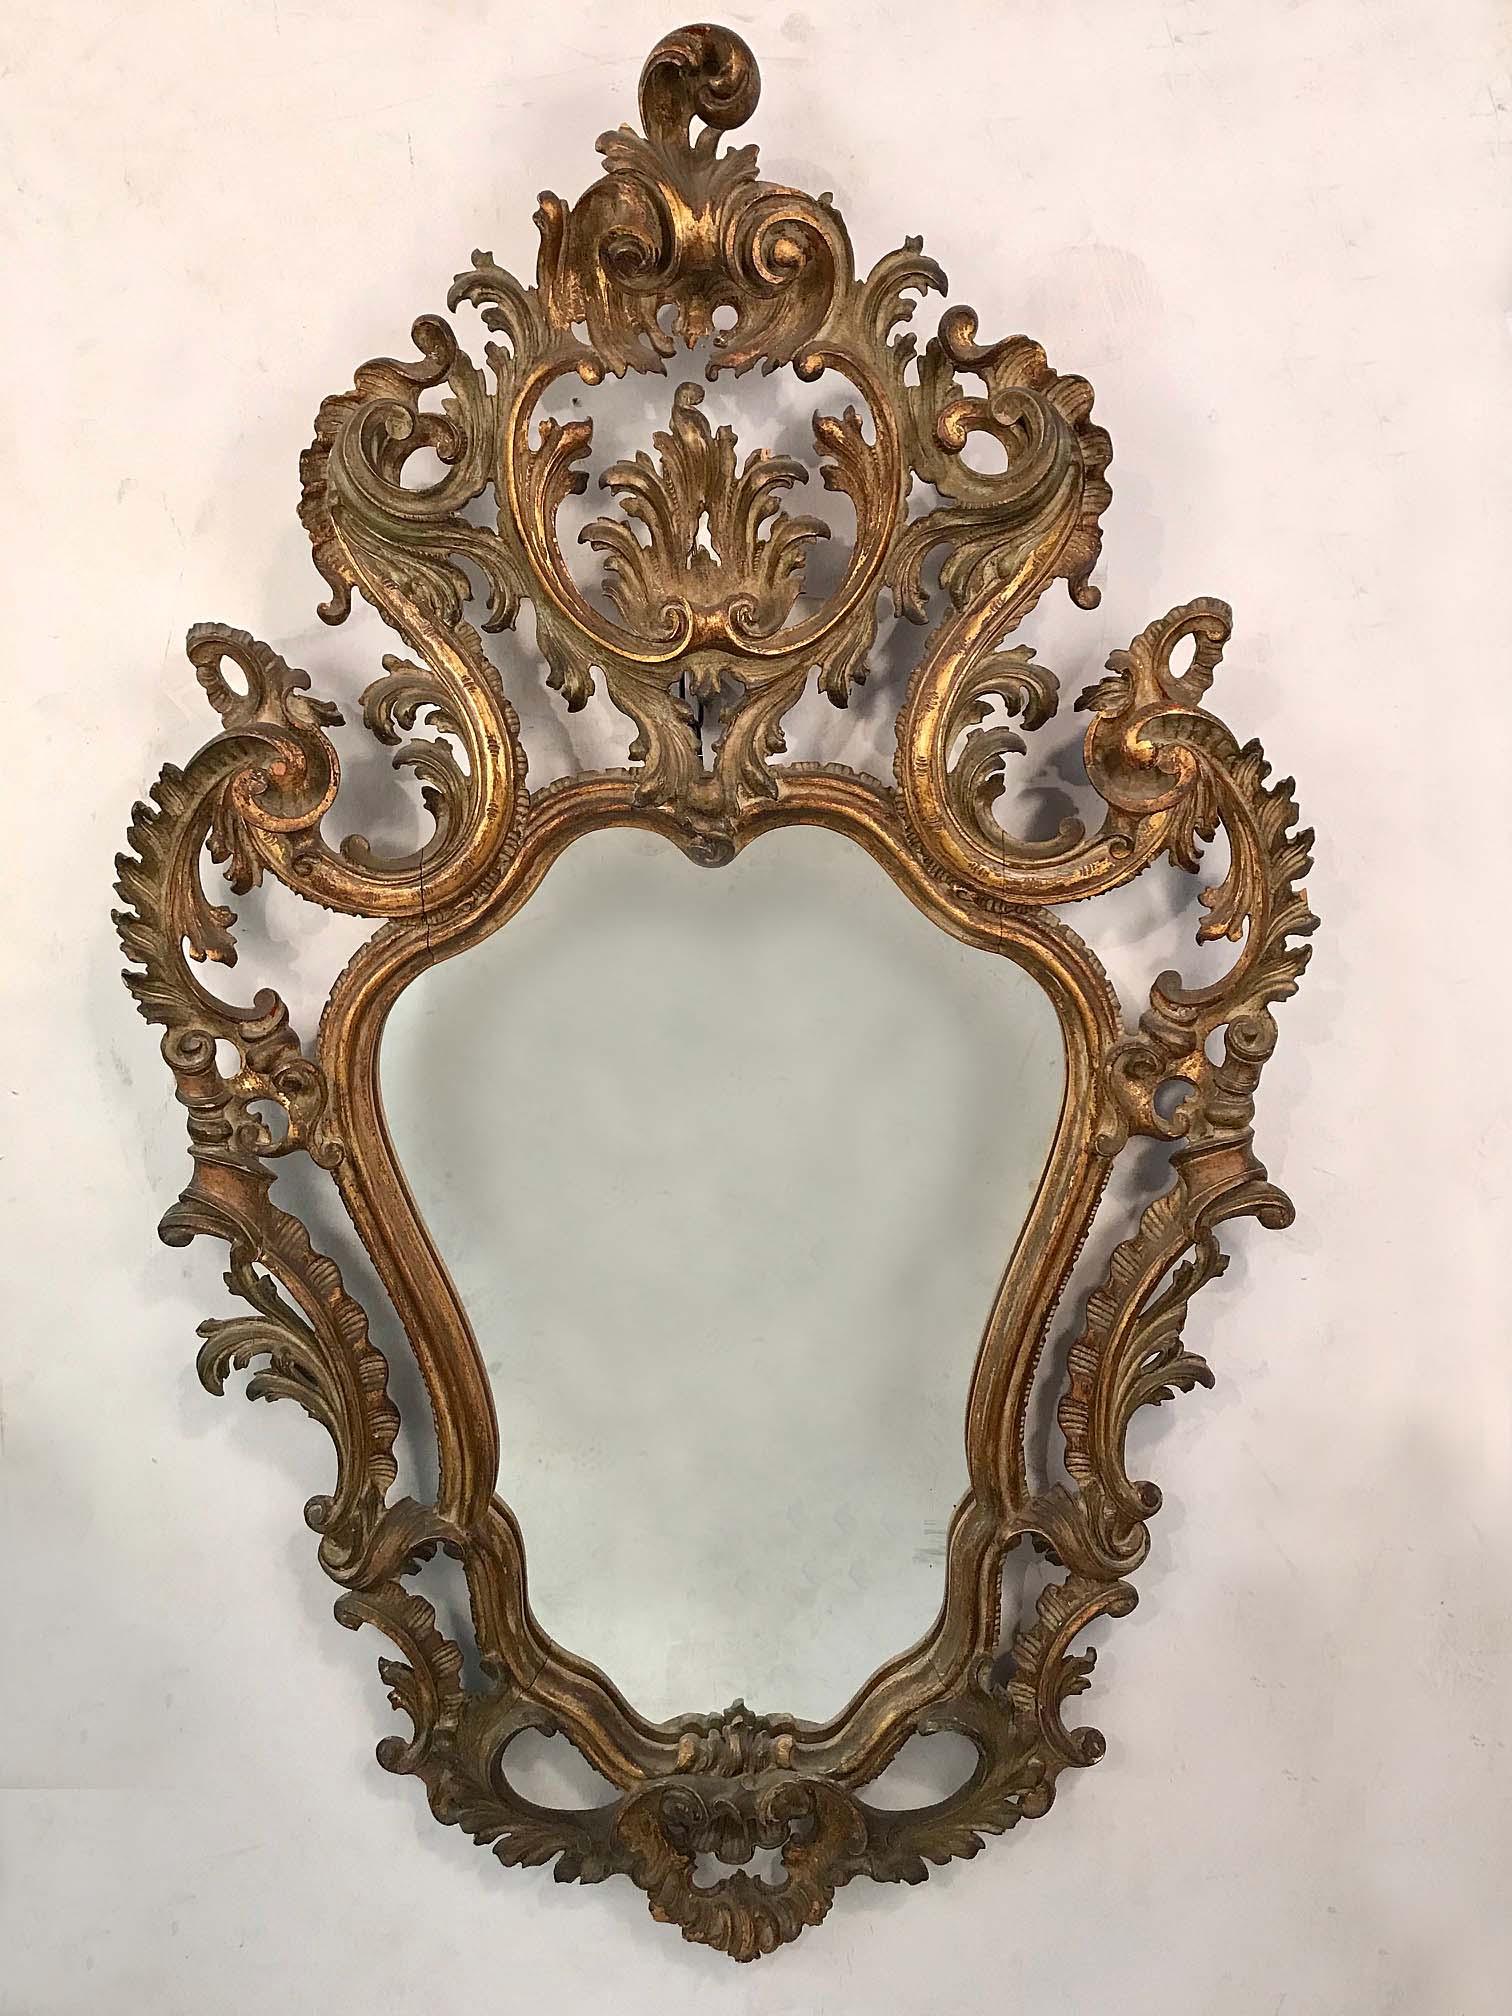 This mirror has a very well-carved frame, leafy, open and shapely. It has a lightness and exuberance that brings out such qualities in its surroundings